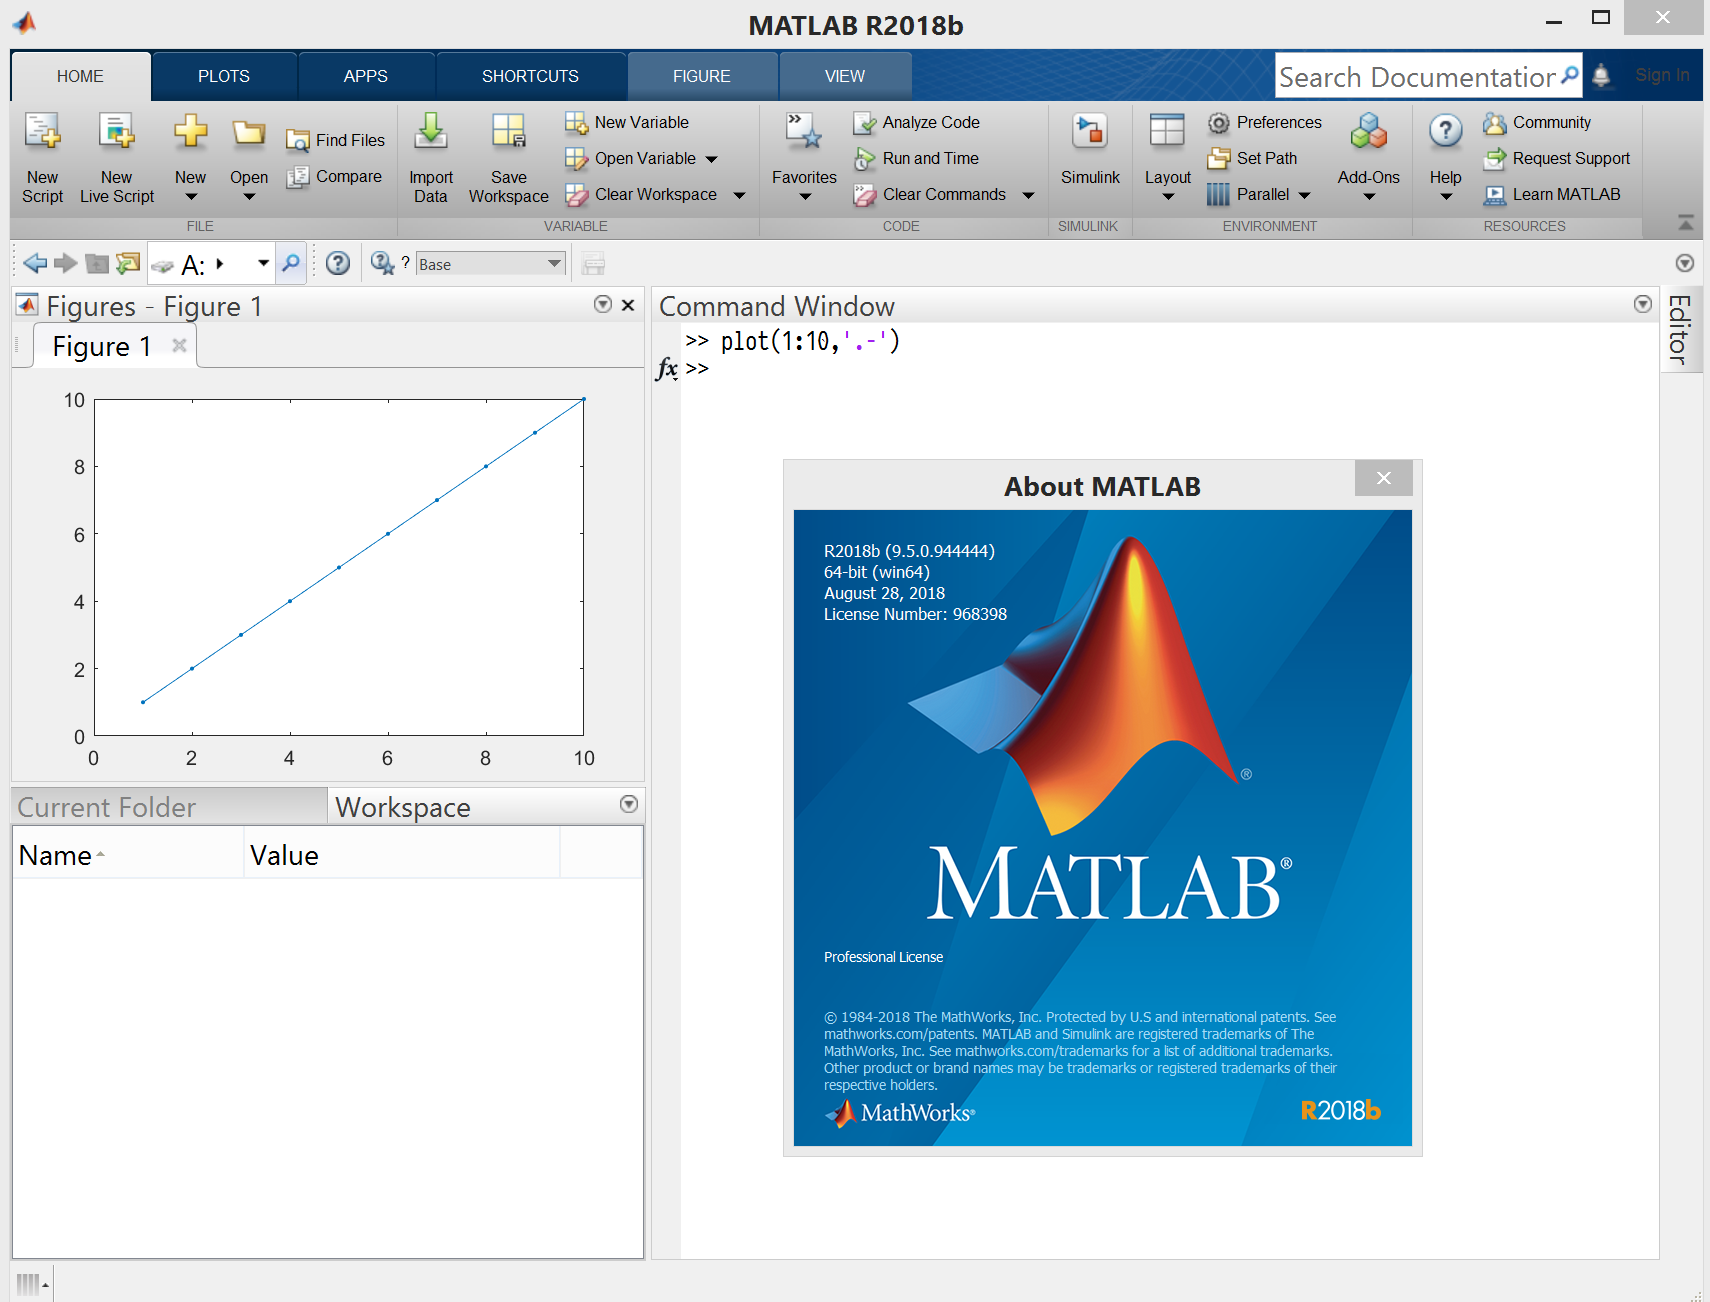 MathWorks MATLAB R2023a 9.14.0.2337262 download the new version for iphone